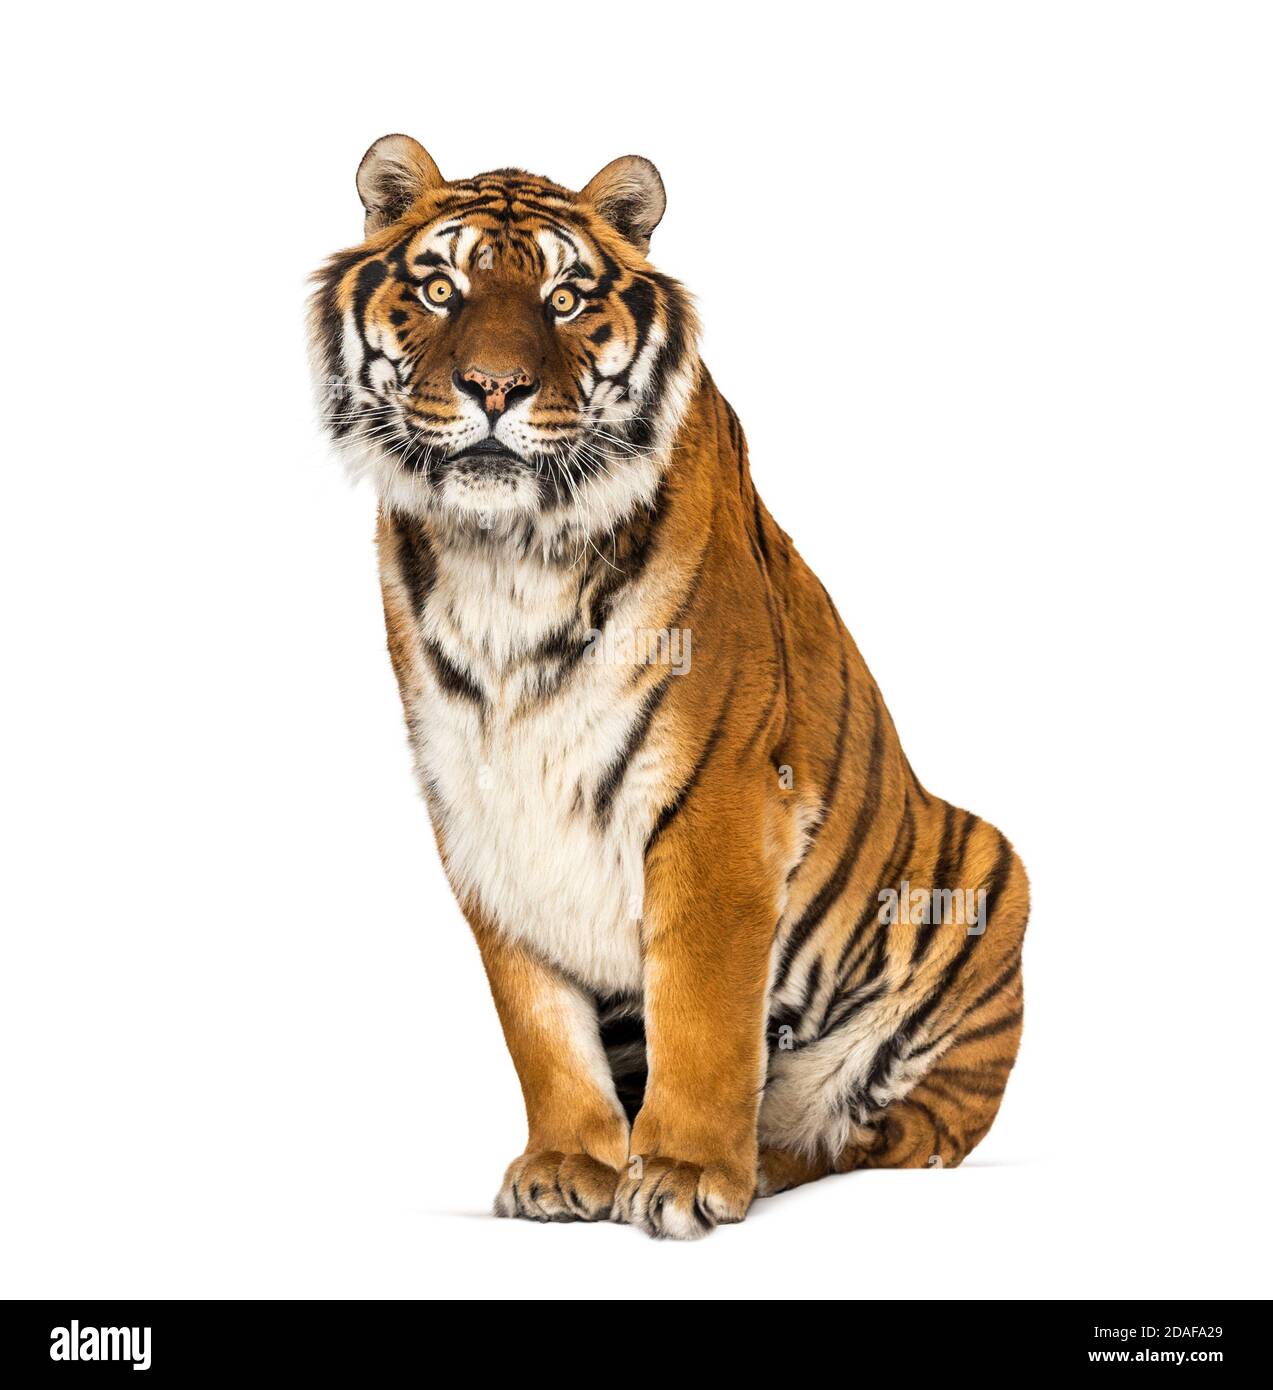 Tiger sitting staring at he camera, isolated on white Stock Photo